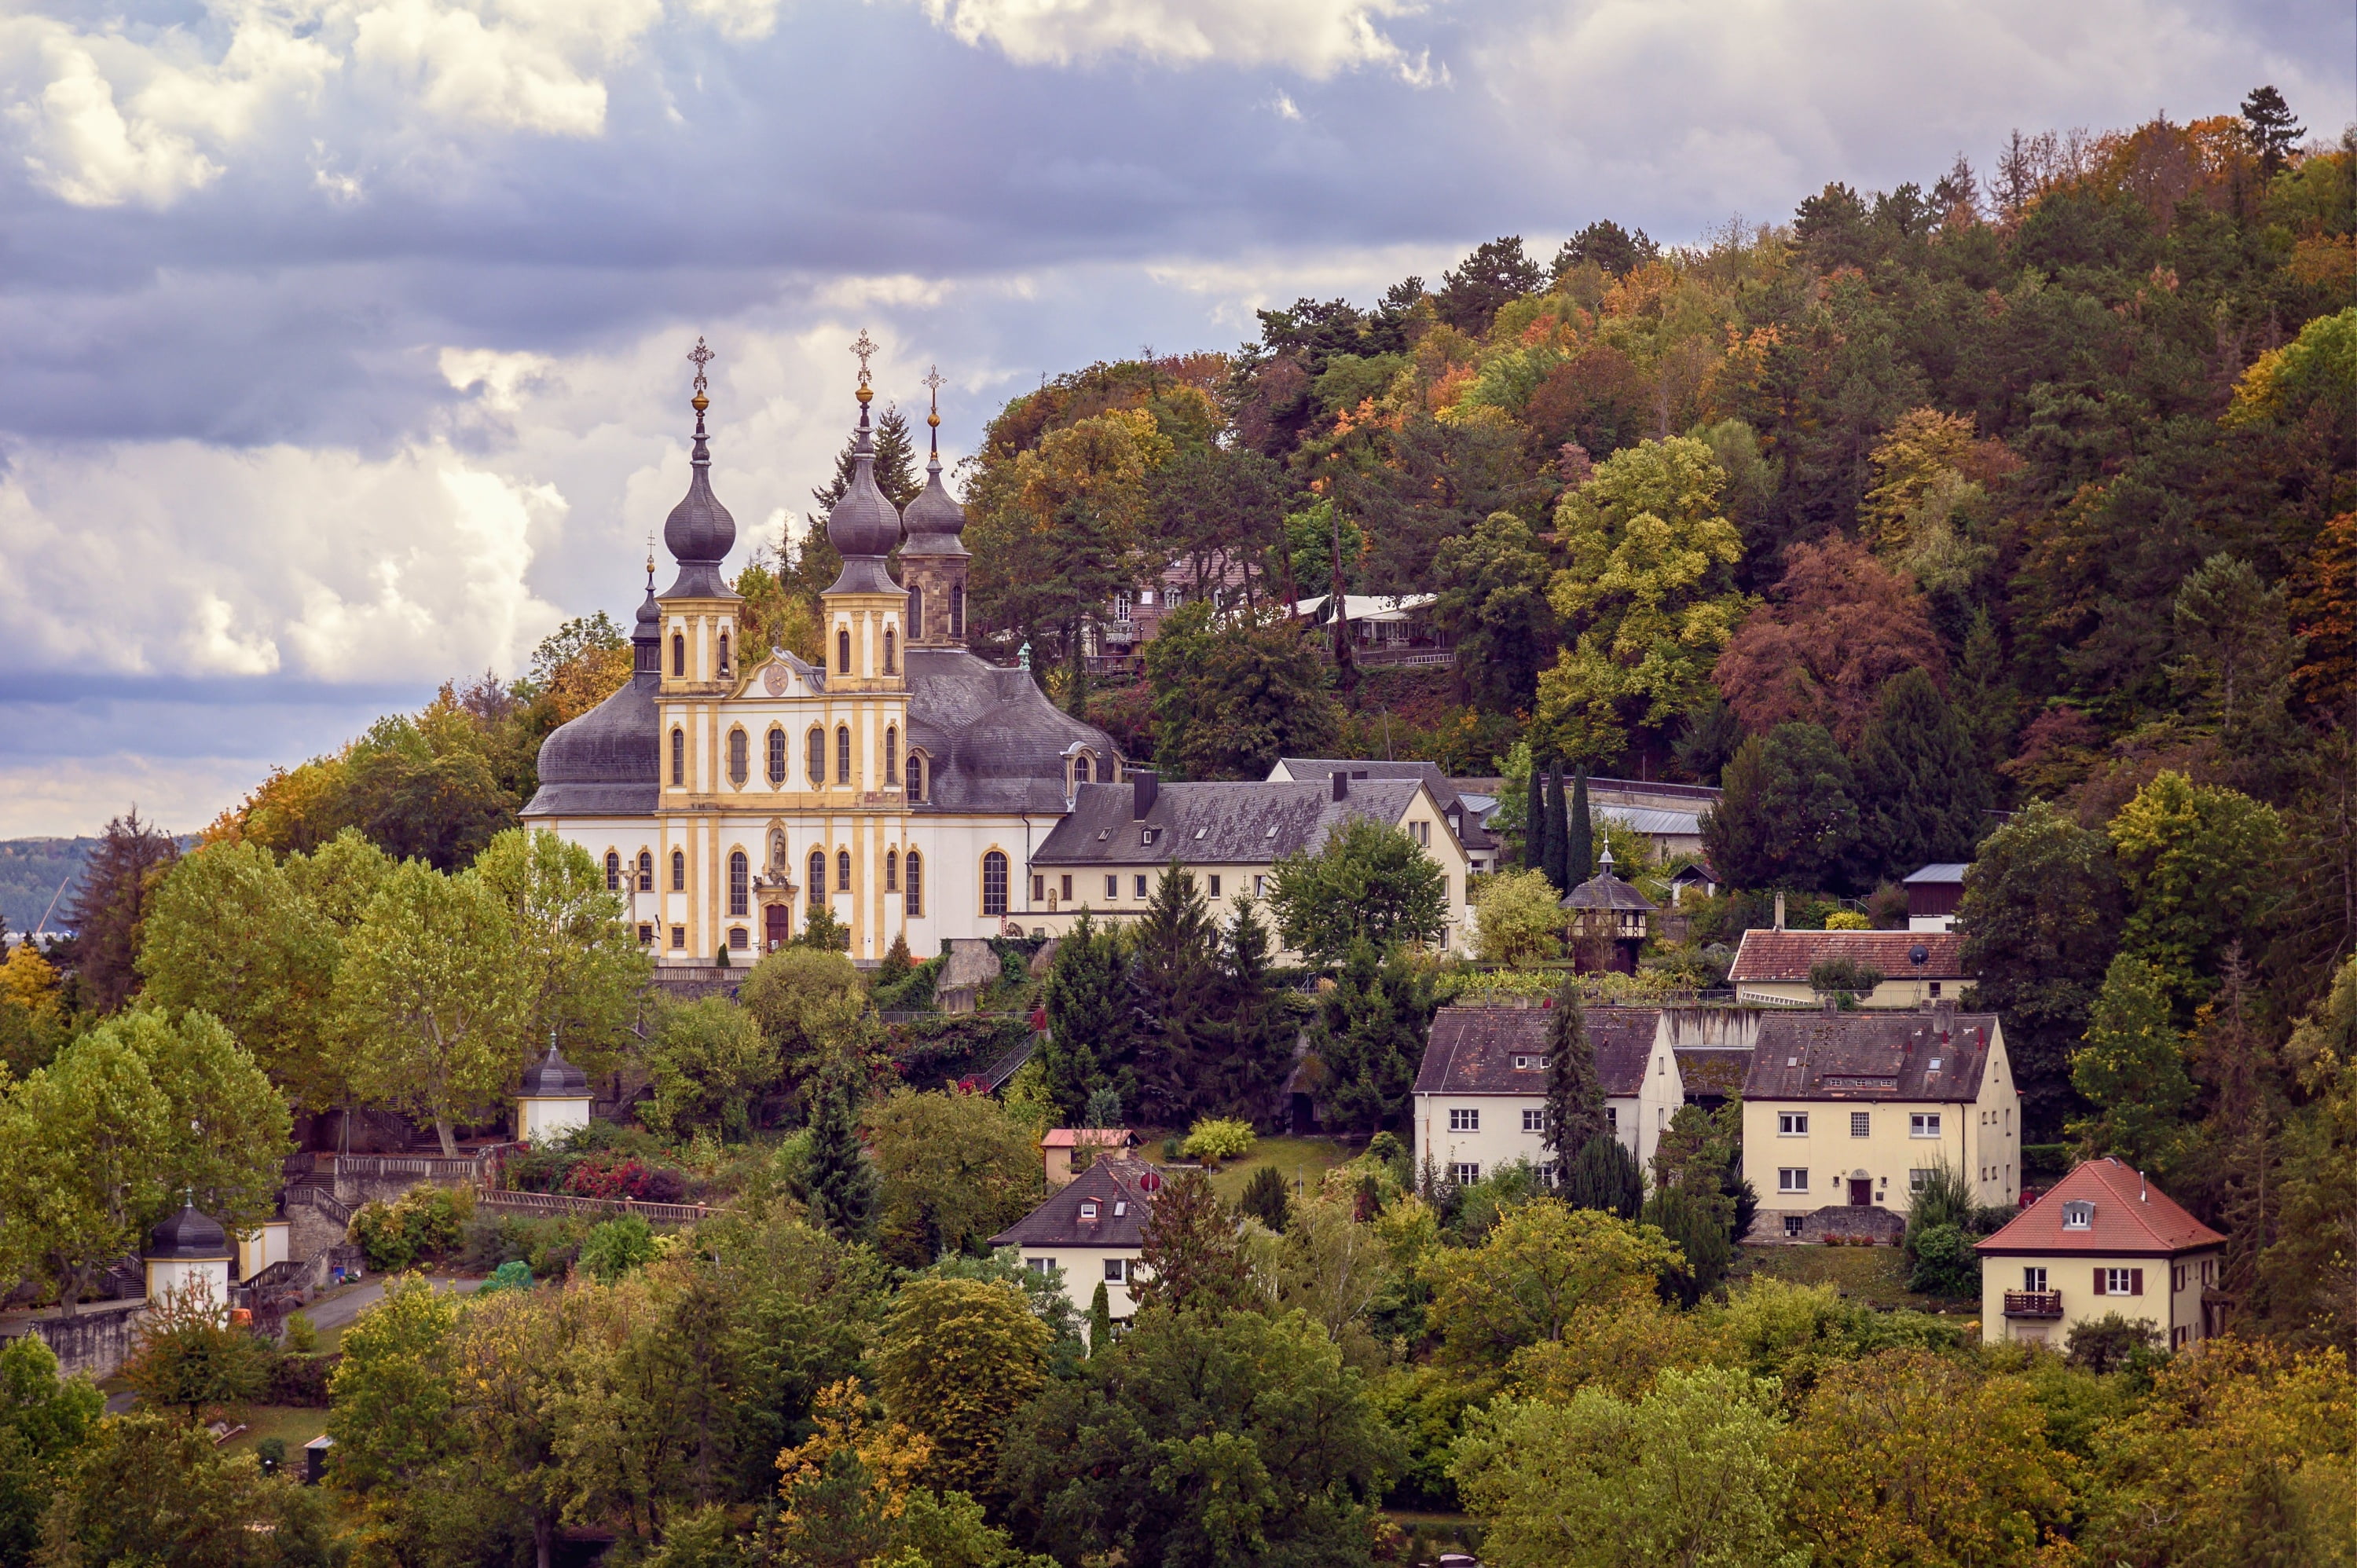 trees, landscape, nature, the city, home, Germany, hill, Church